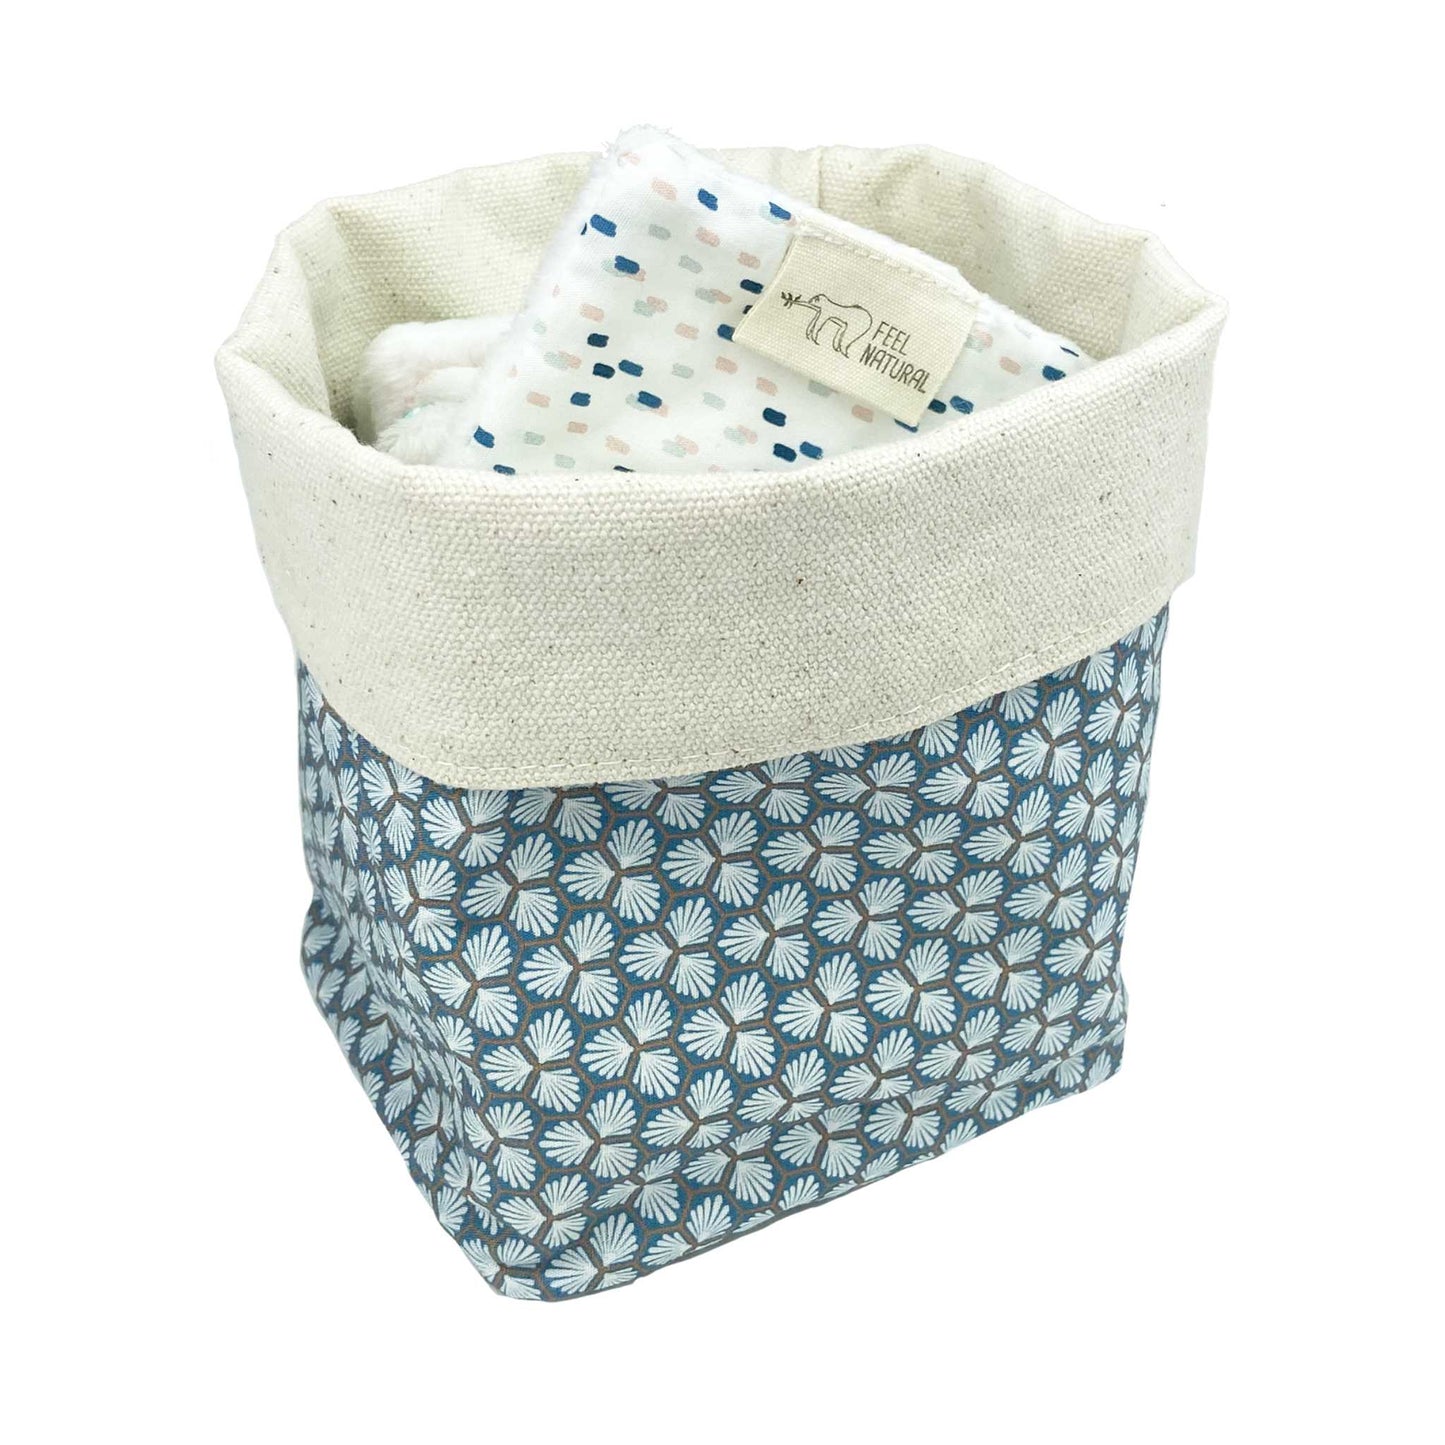 Feel Natural Facial Rounds Cotton Storage Basket For Reusable Make Up Rounds - Feel Natural